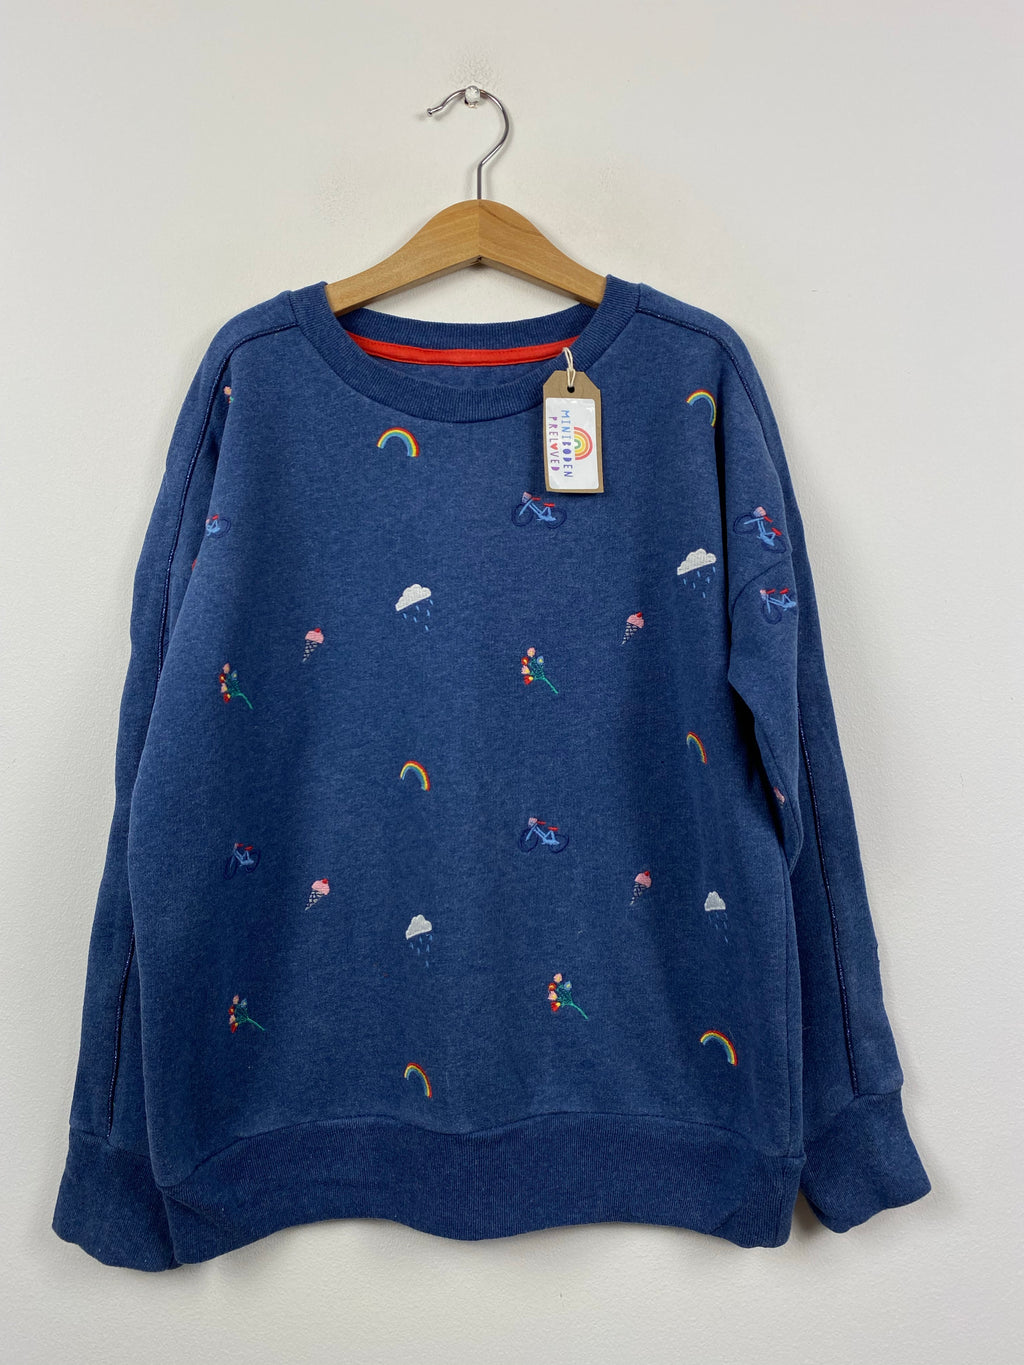 Embroidered Rainbows Jumper (9-10 Years)